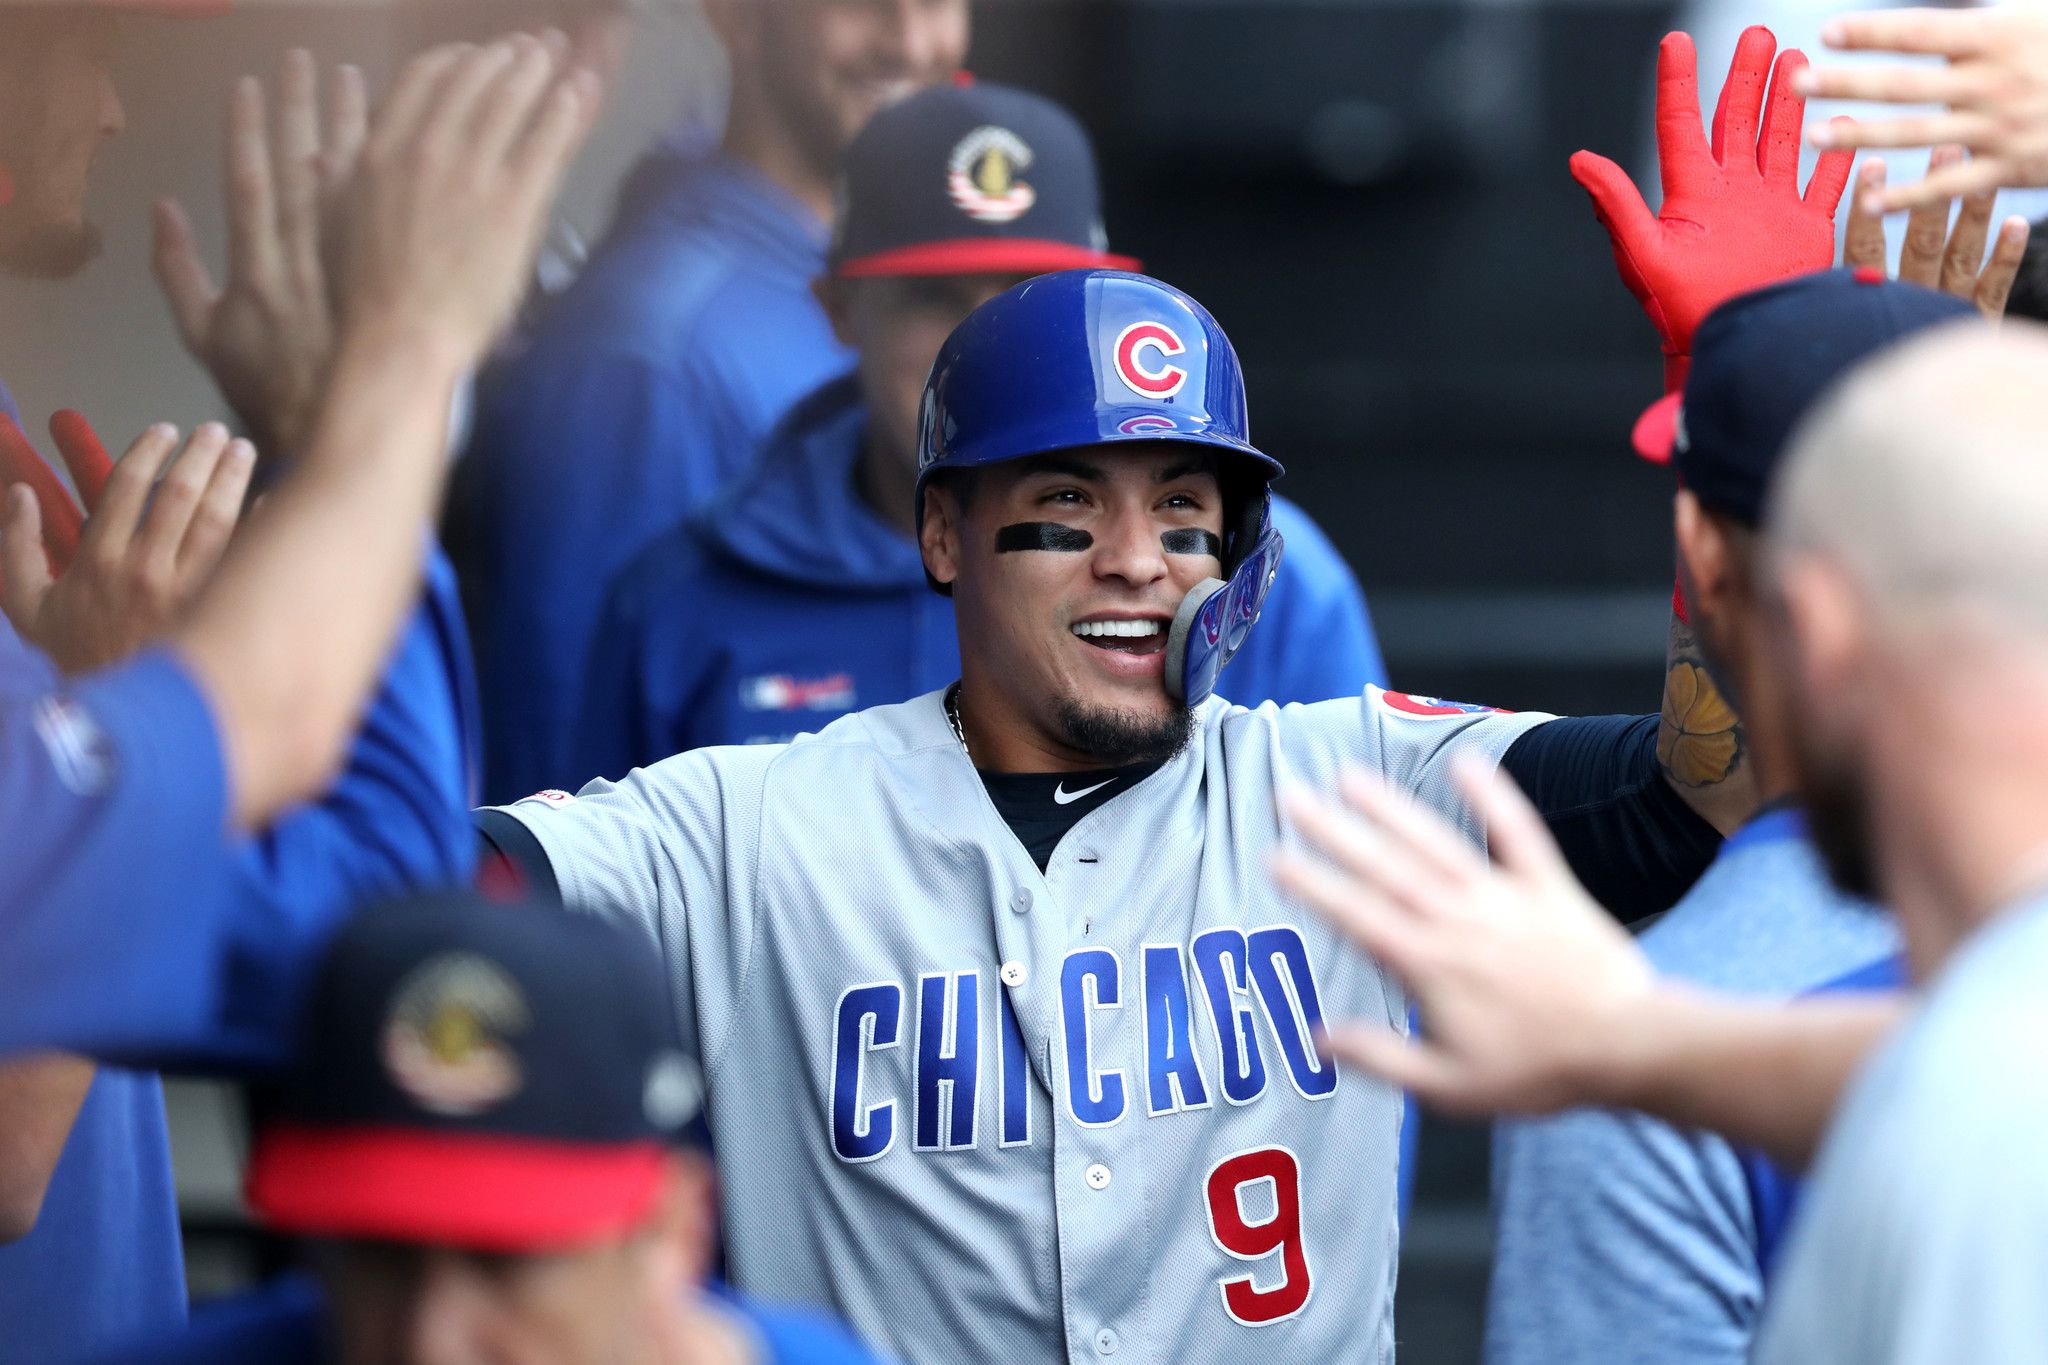 WATCH: Javy Baez on his 'El Mago' play of the year